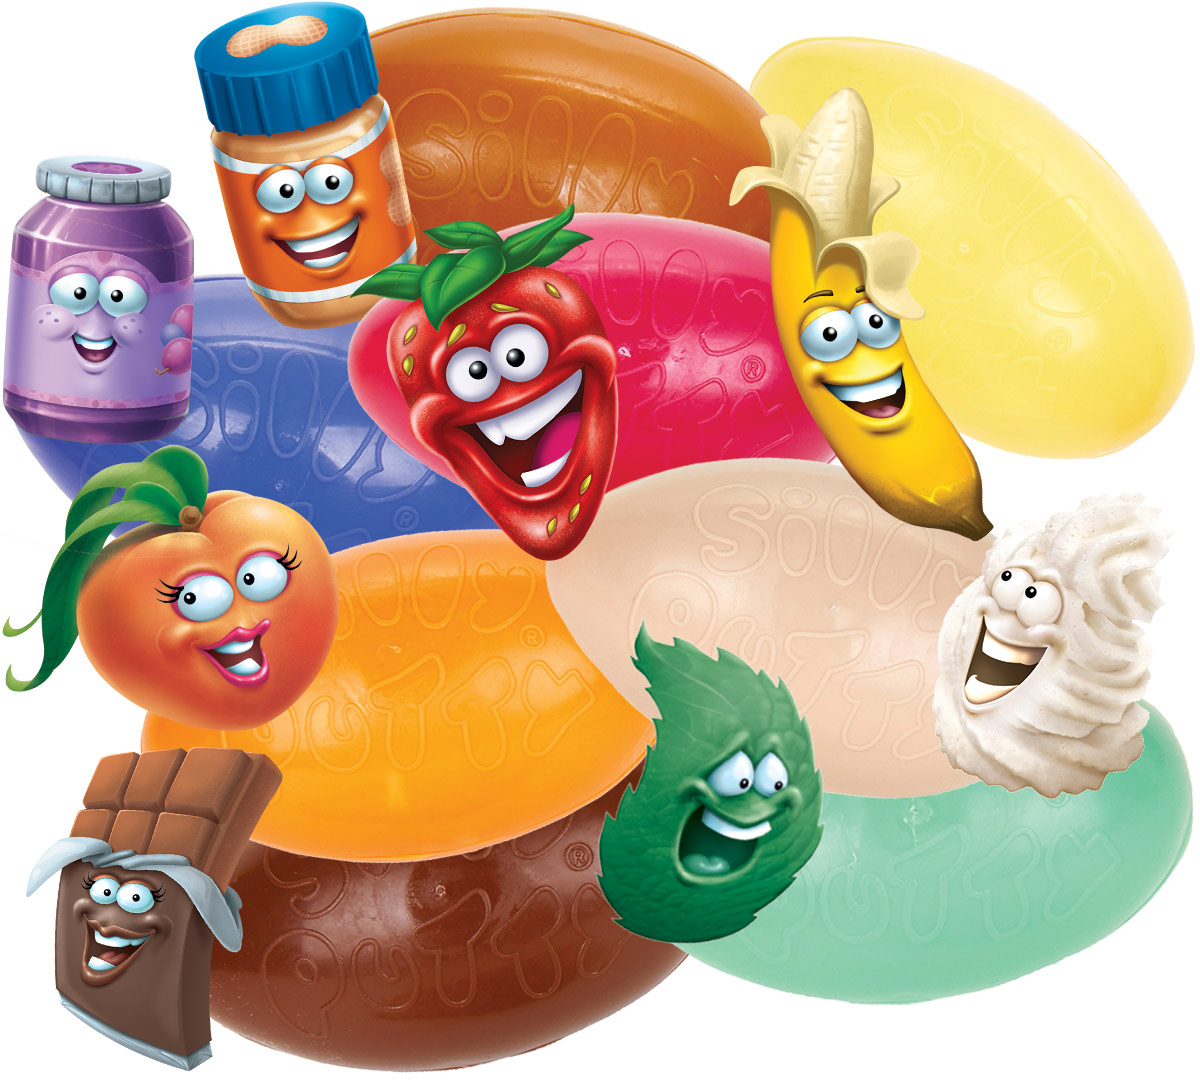 Silly Putty Crayola Silly Putty Surprise Scents 1 Pack Collect All Have Fun!! 